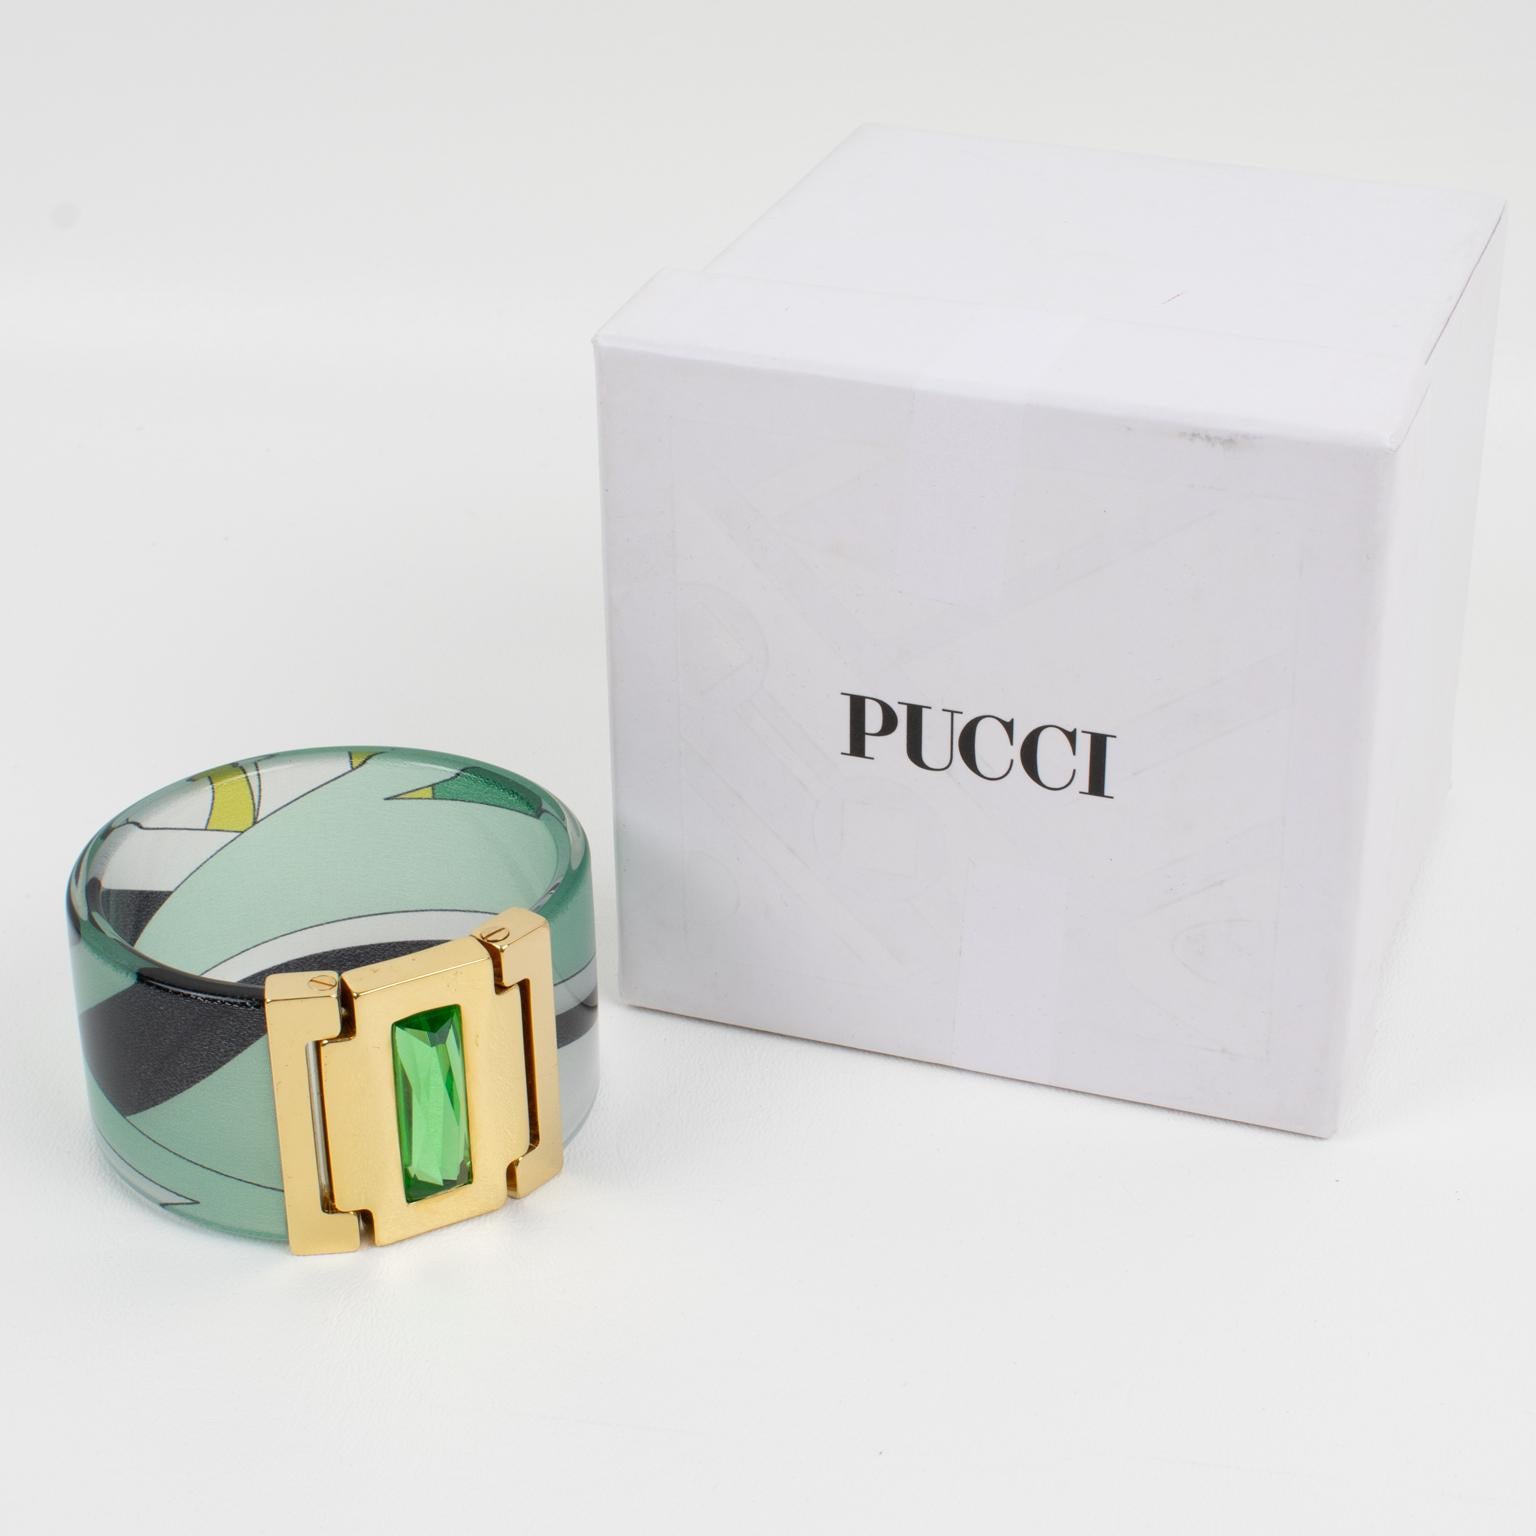 Emilio Pucci designed this lovely gilded metal, acrylic, and silk bracelet bangle. The massive bangle shape boasts a clear acrylic band with multicolor Pucci silk inclusion in emerald green, avocado green, black, and white colors. The bracelet